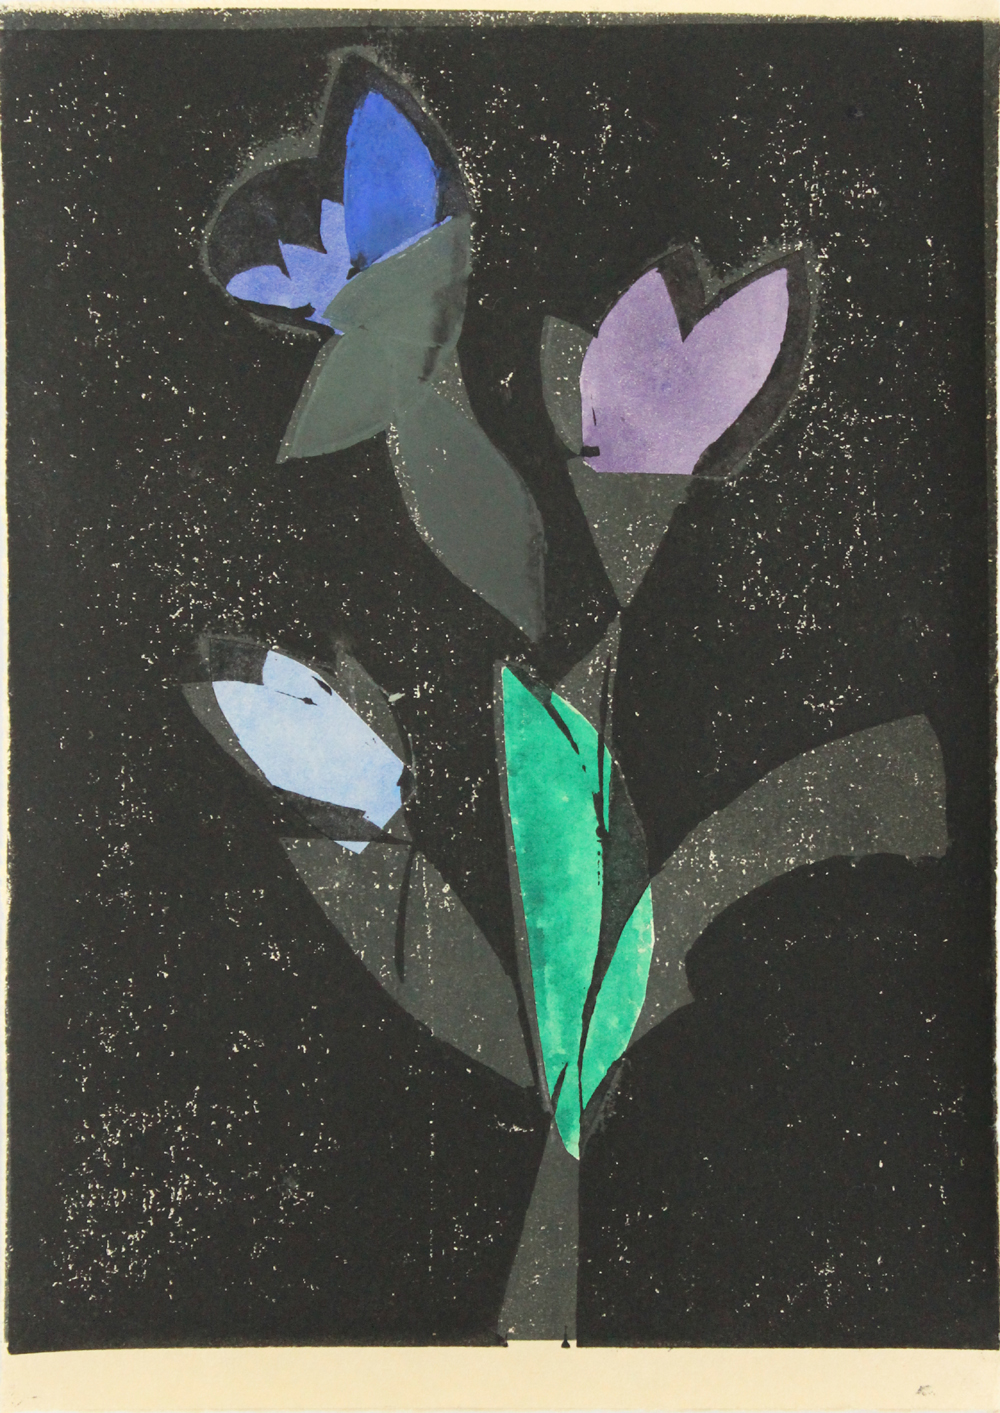   Flowers in Window I    2016. lino print, watercolour &amp; collage, 22 x 15cm  